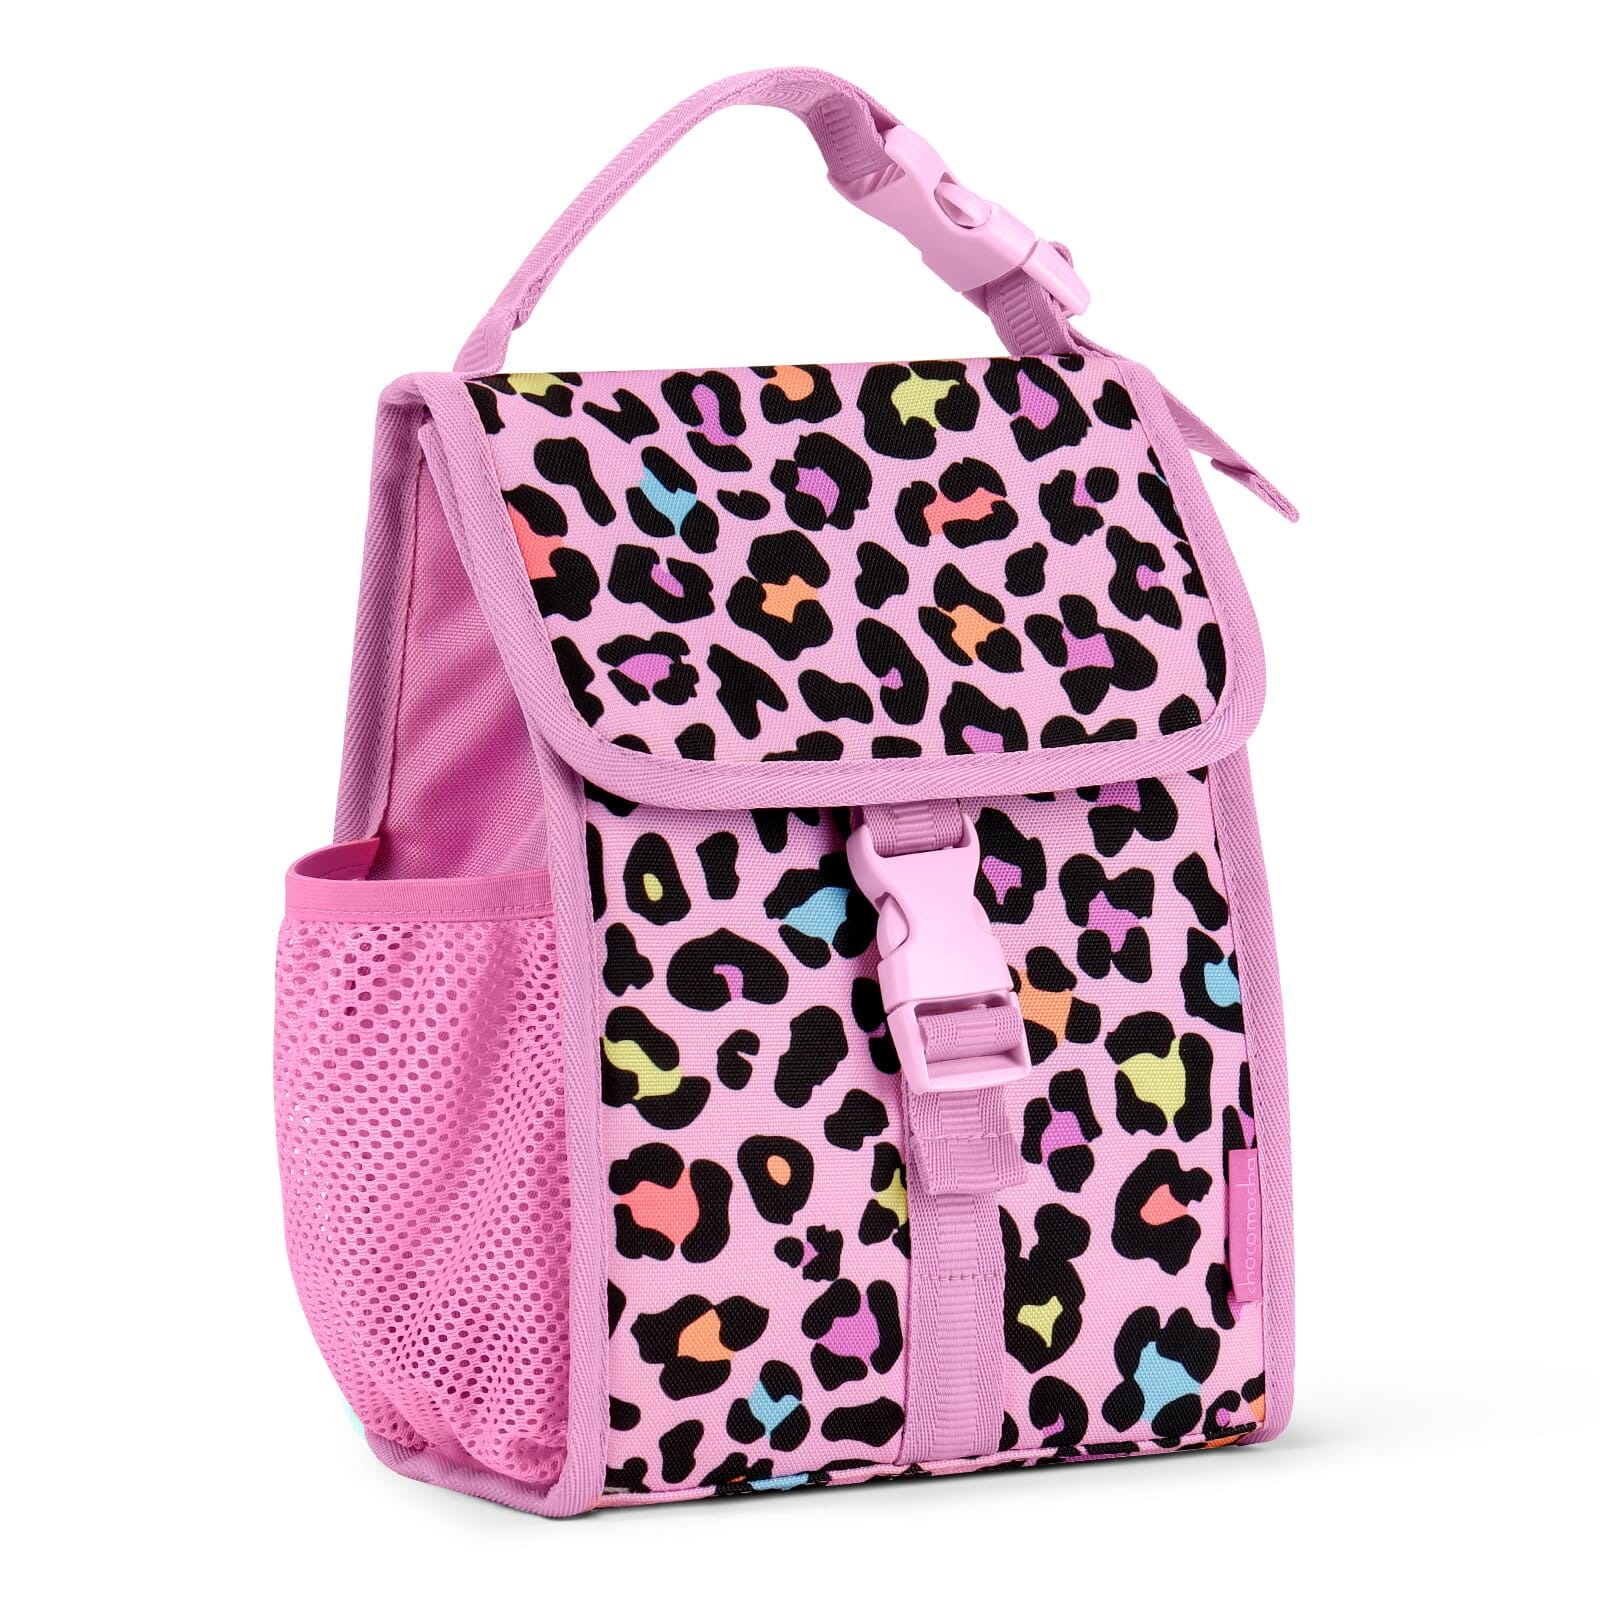 Choco Mocha Cheetah Lunch Box for Girls Preschool Elementary Daycare, Reusable Insulated Girls Lunch Bag with Water Bottle Holder for Kids Toddler Travel, Leopard Pink chocomochakids 